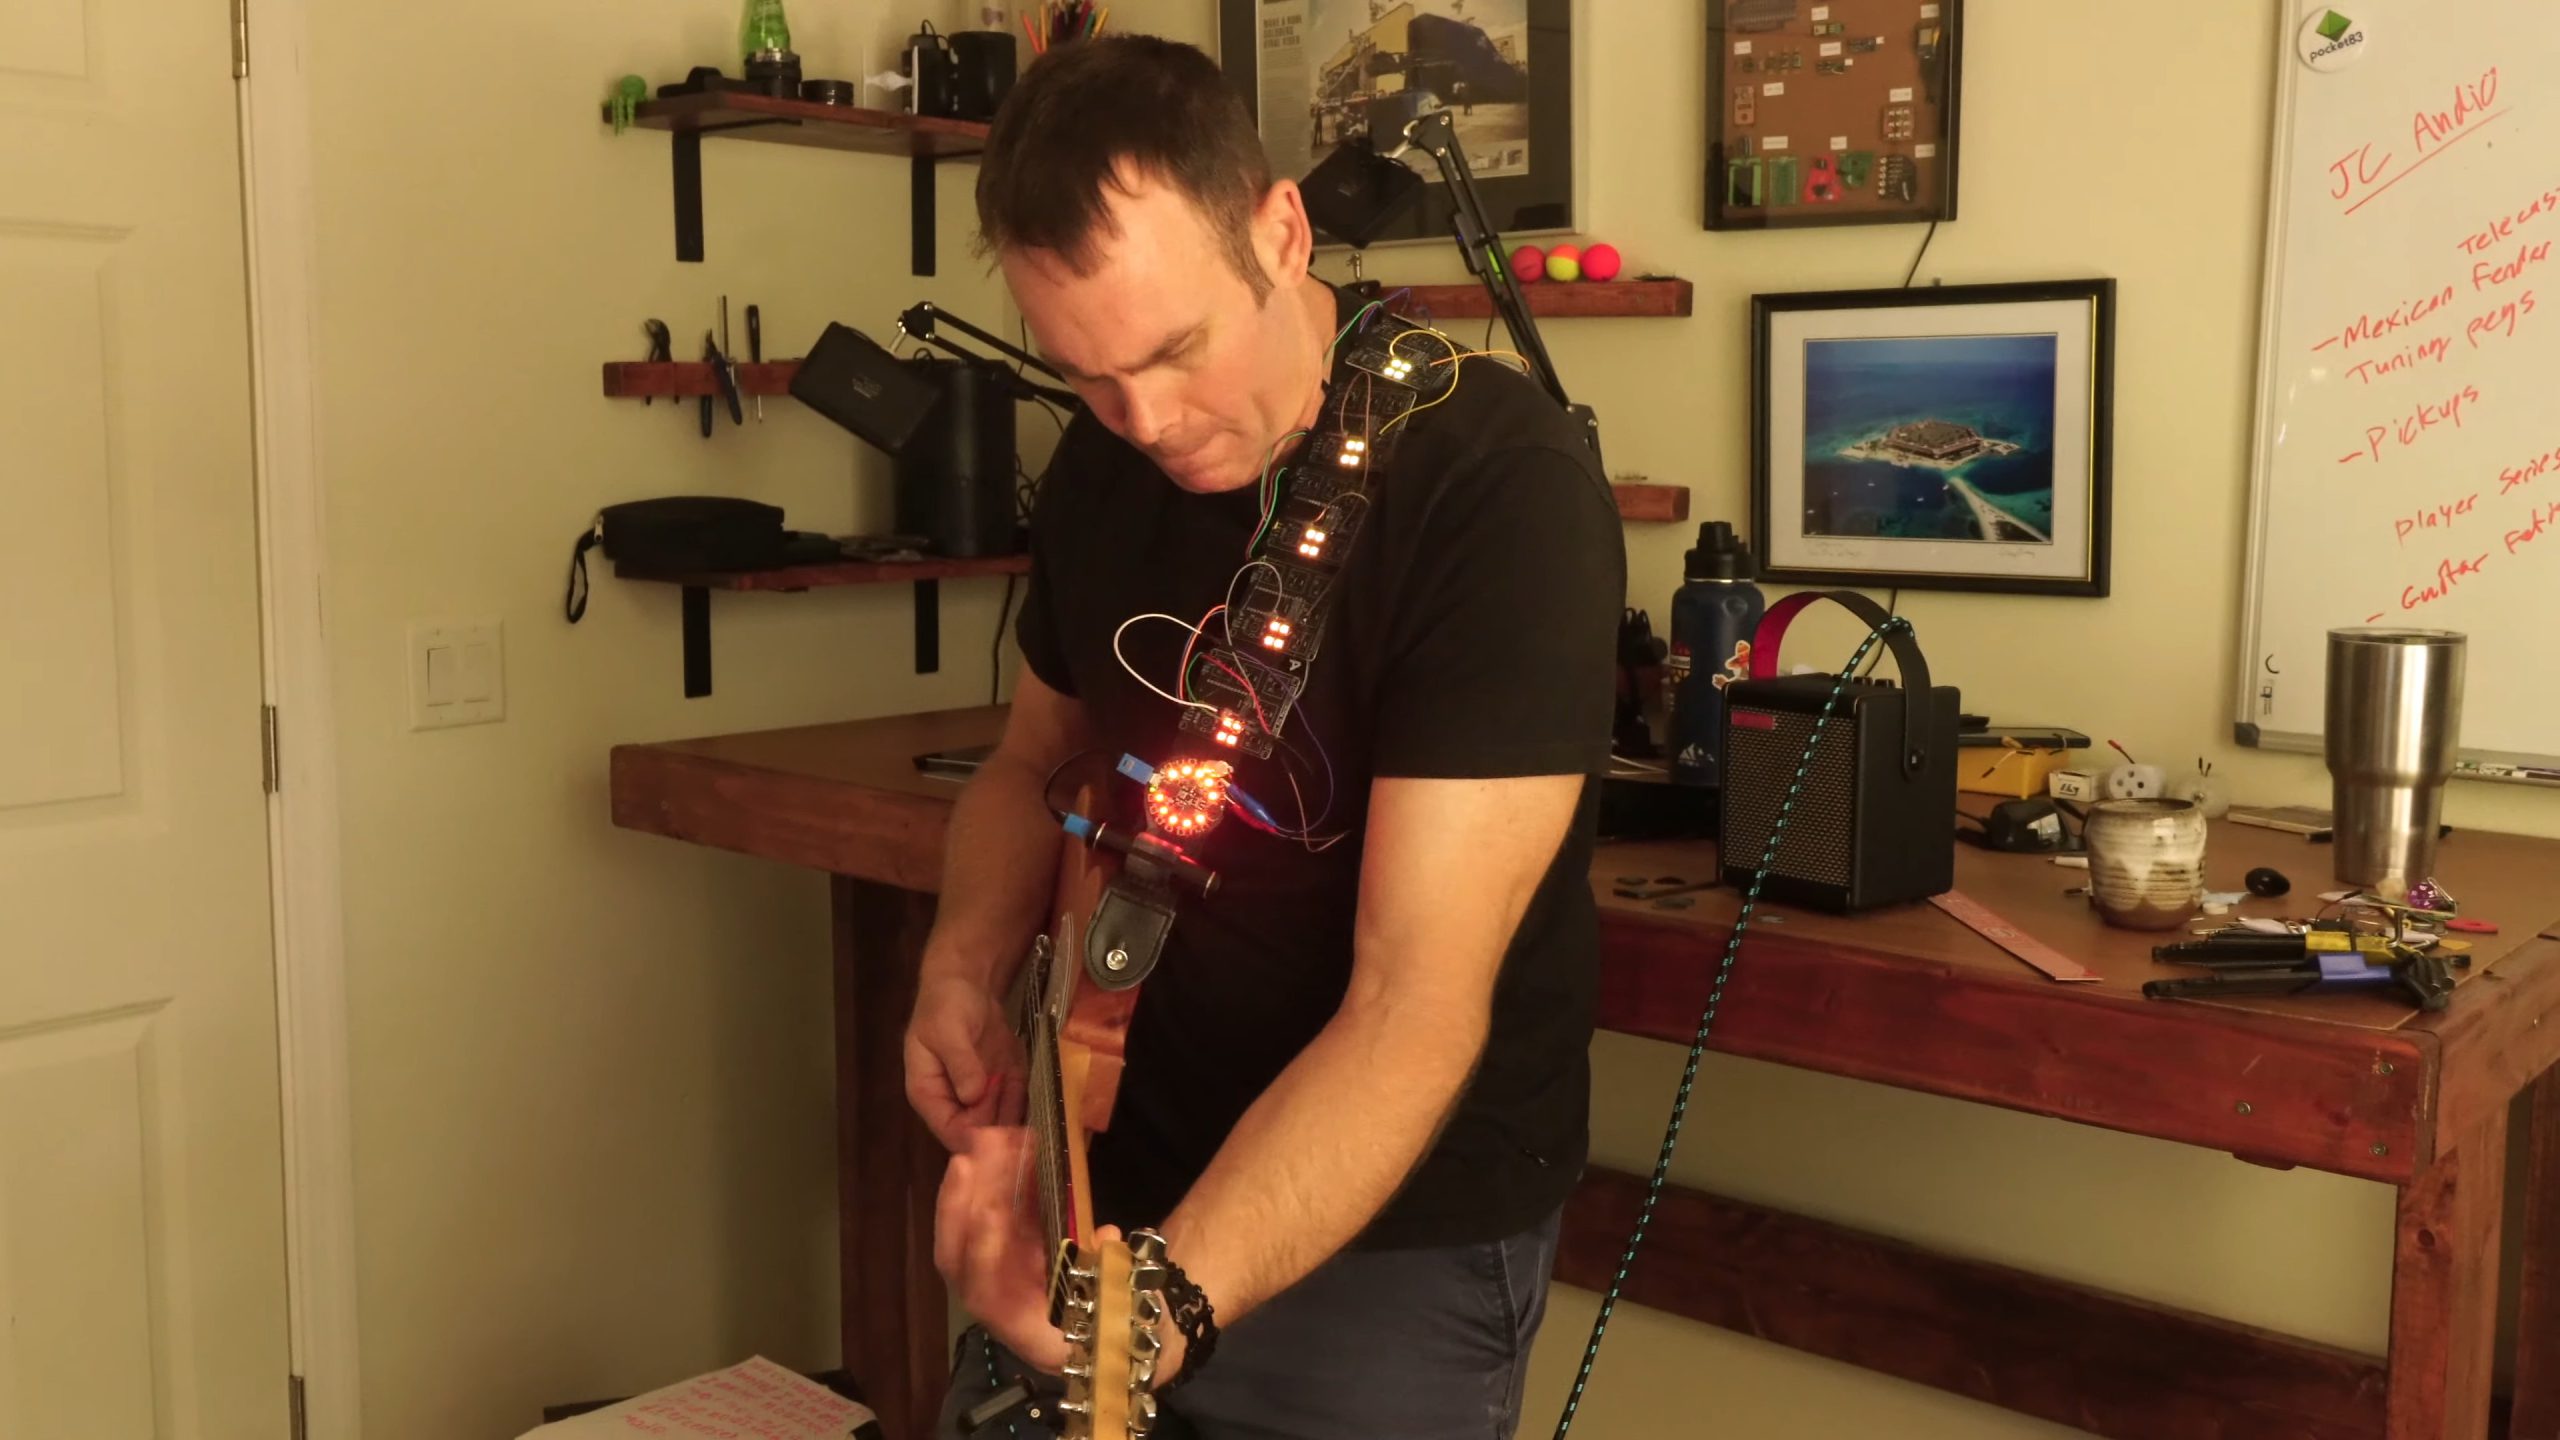 Cyberpunk Guitar Strap Lights Up with Repurposed PCBs